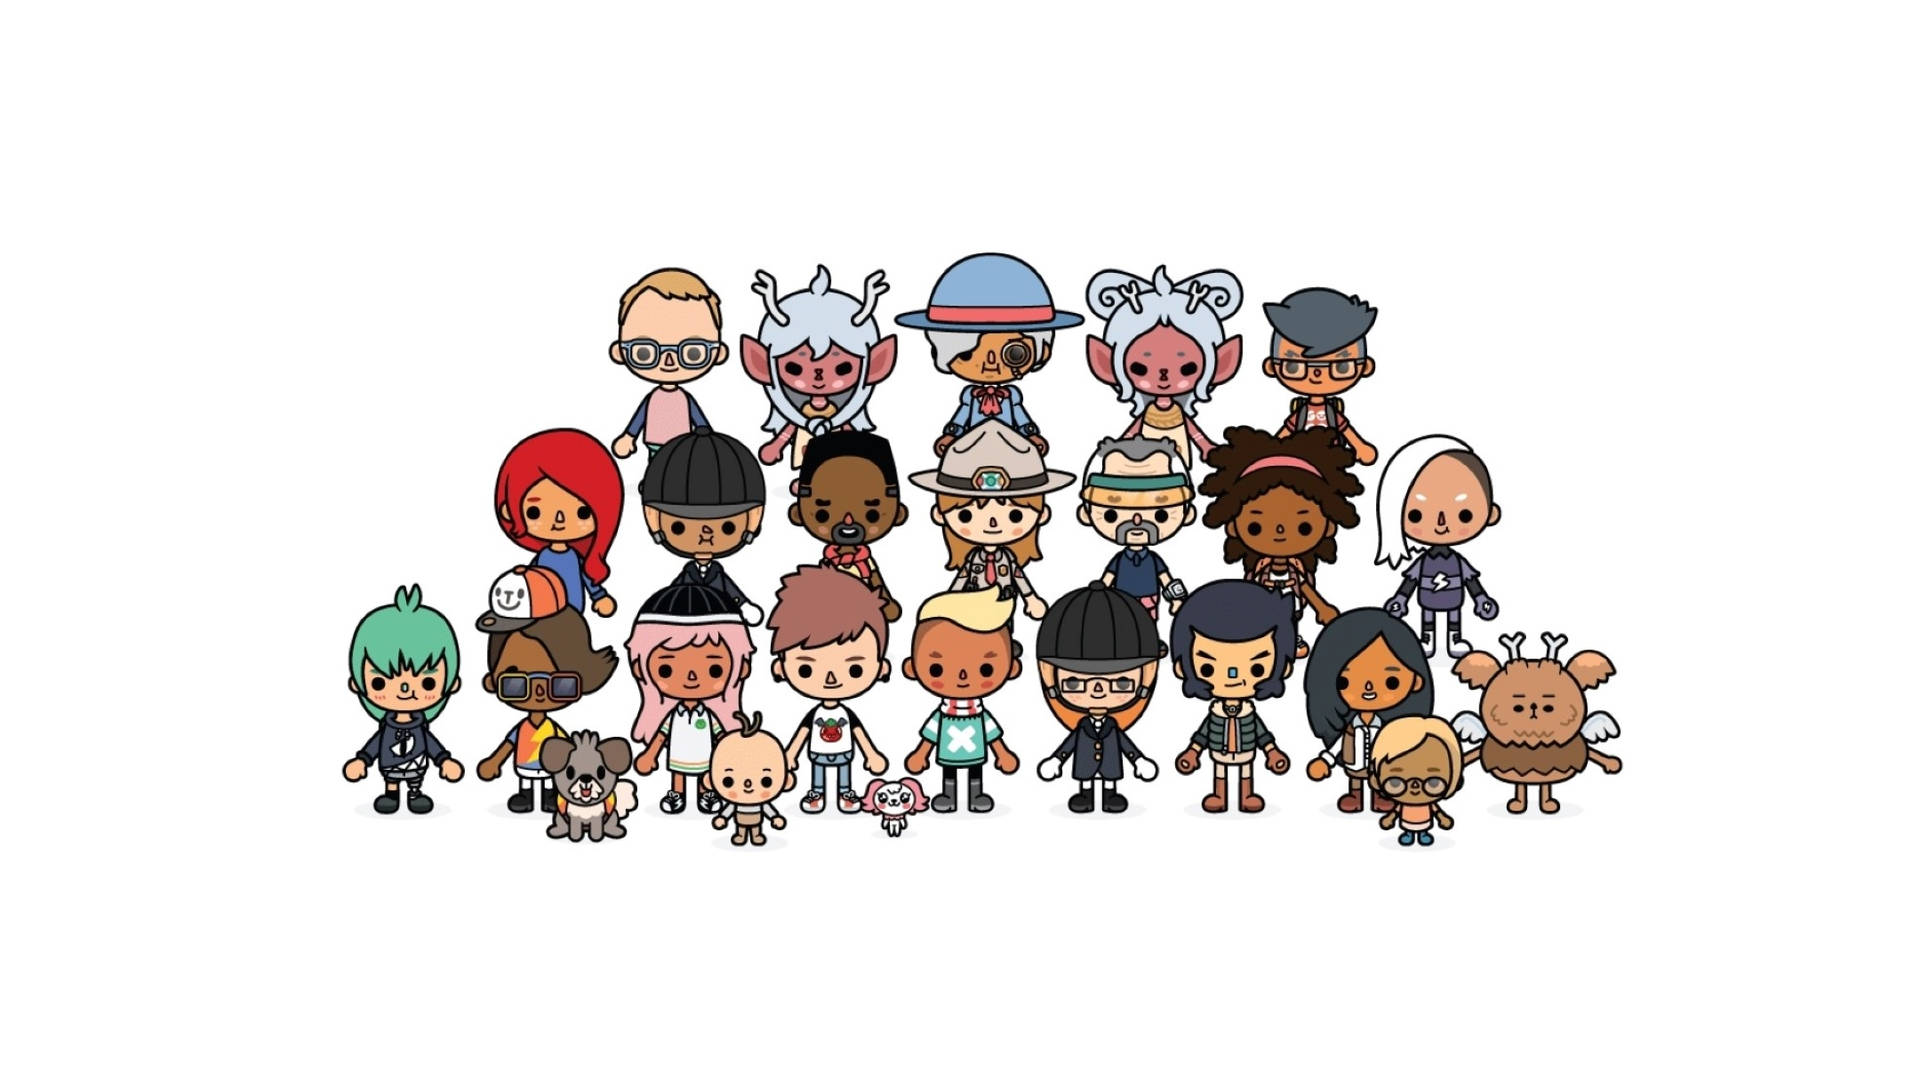 White Themed Toca Boca Characters in a Creative Display Wallpaper